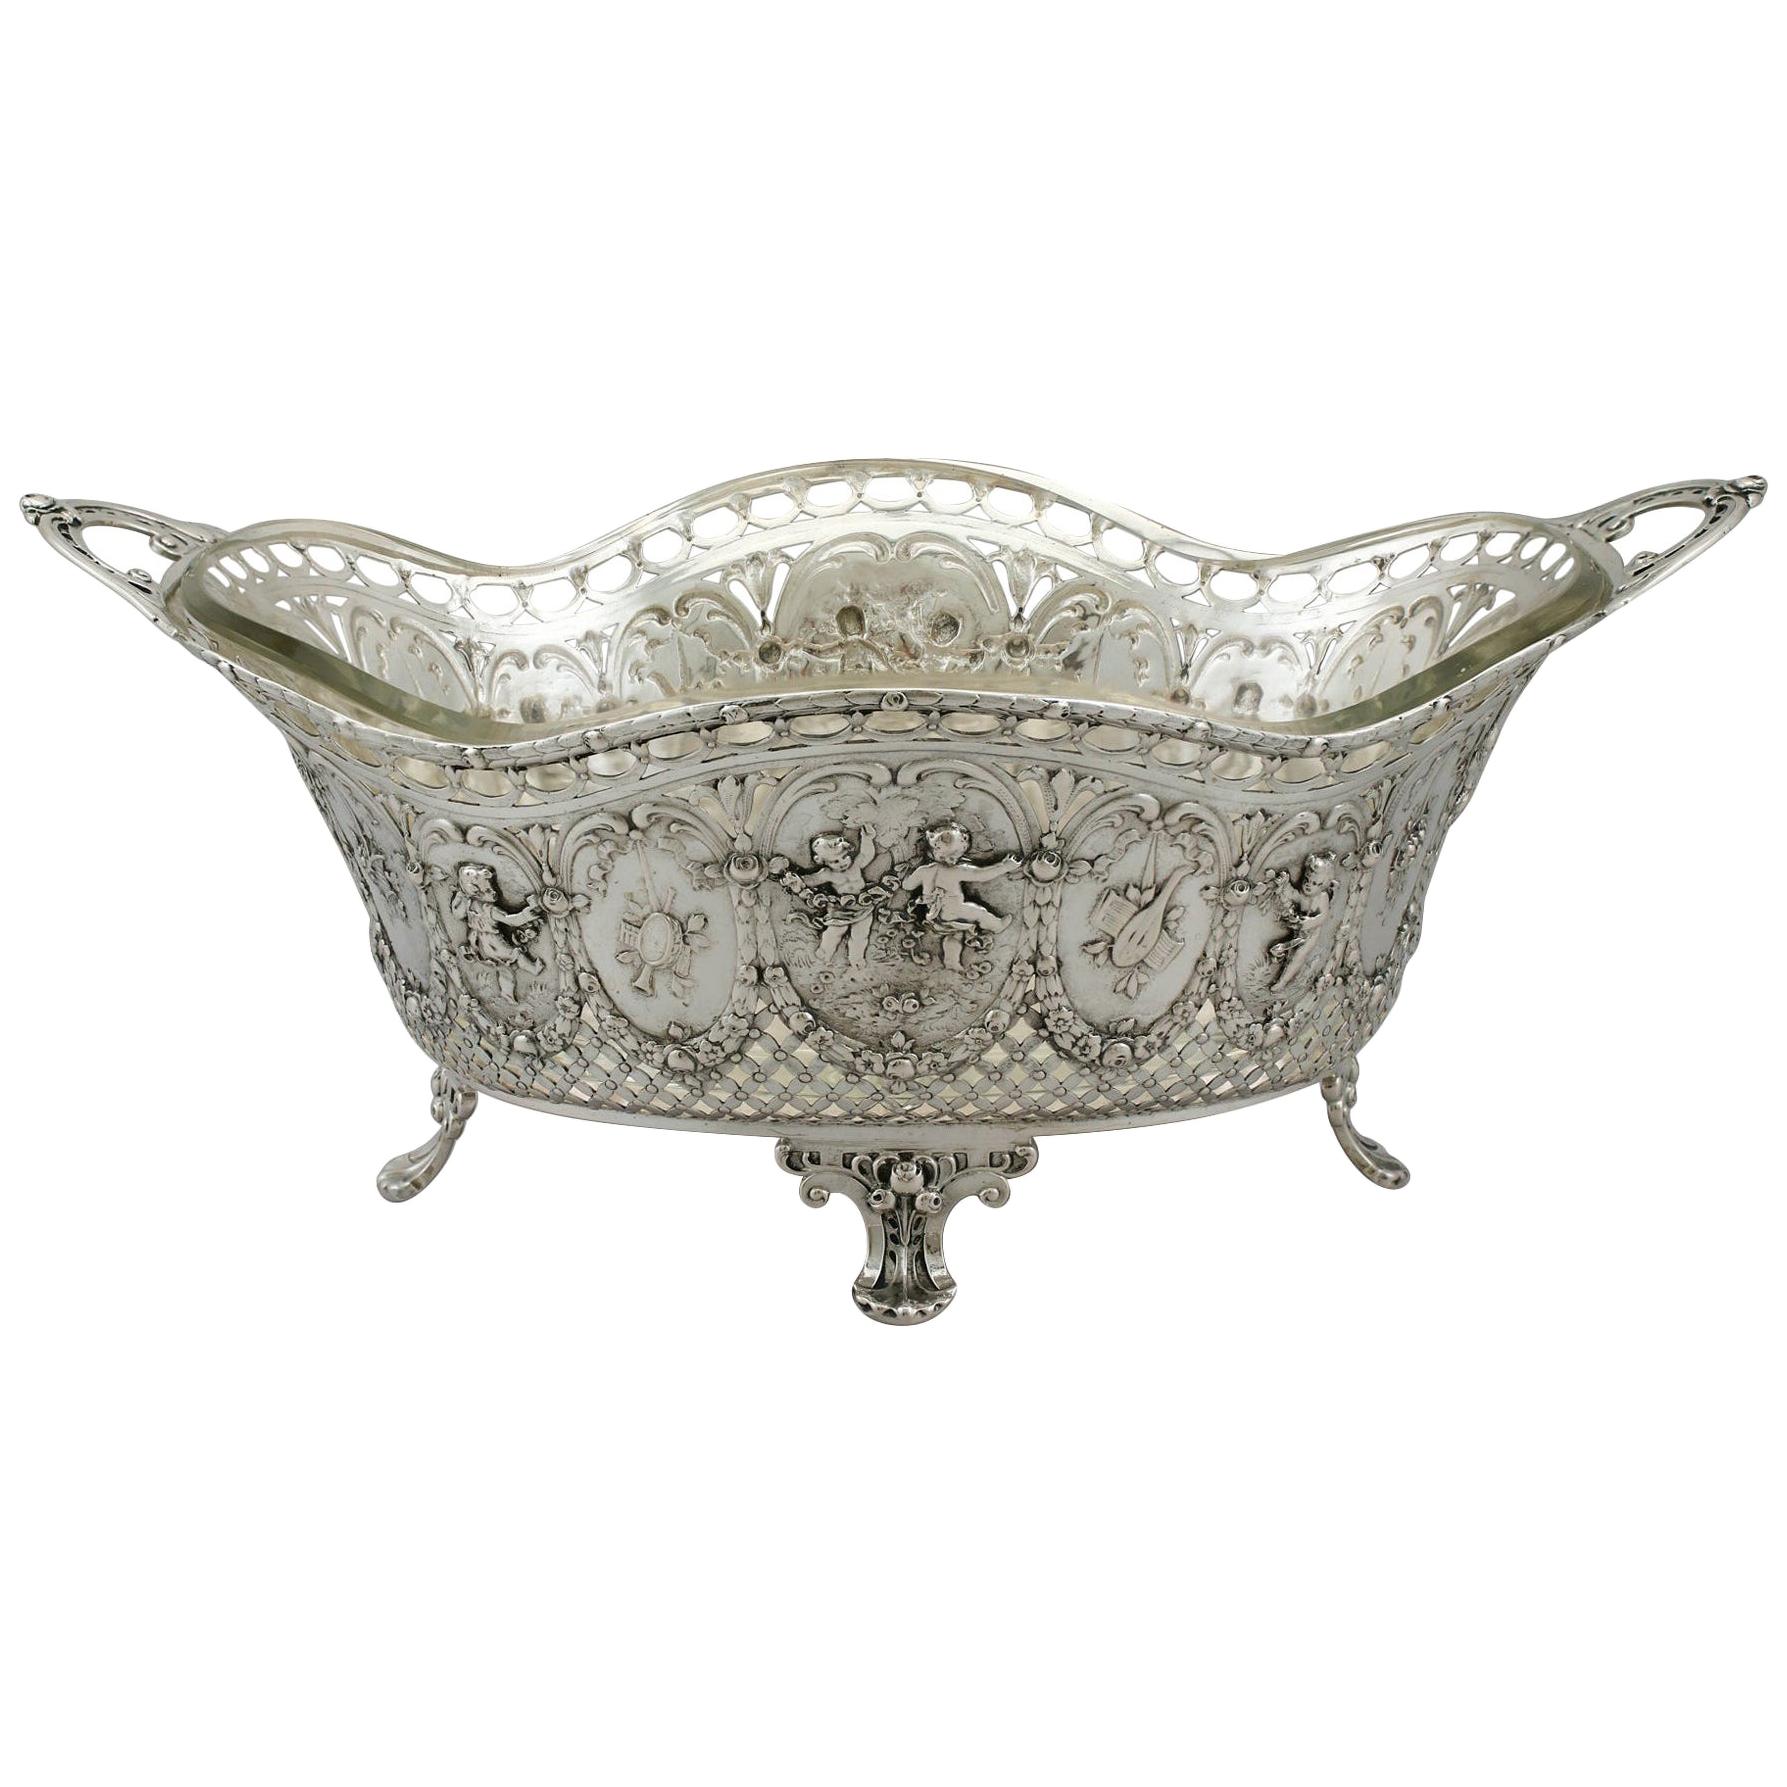 Antique Italian Silver and Glass Centrepiece or Basket